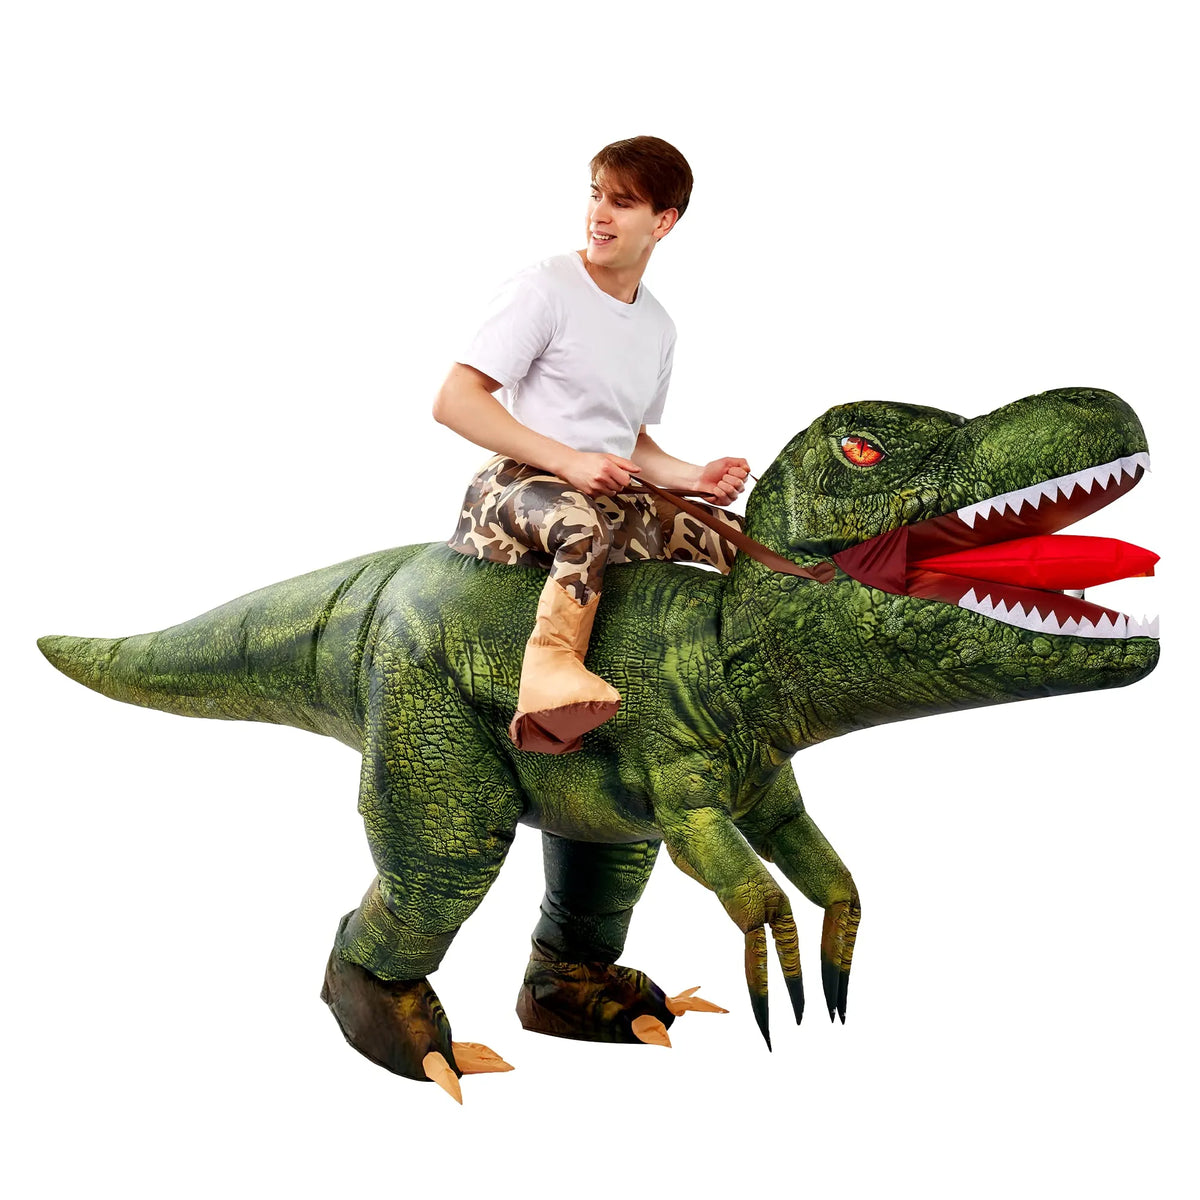 Become the Center of Attention with an Inflatable T-Rex Costume